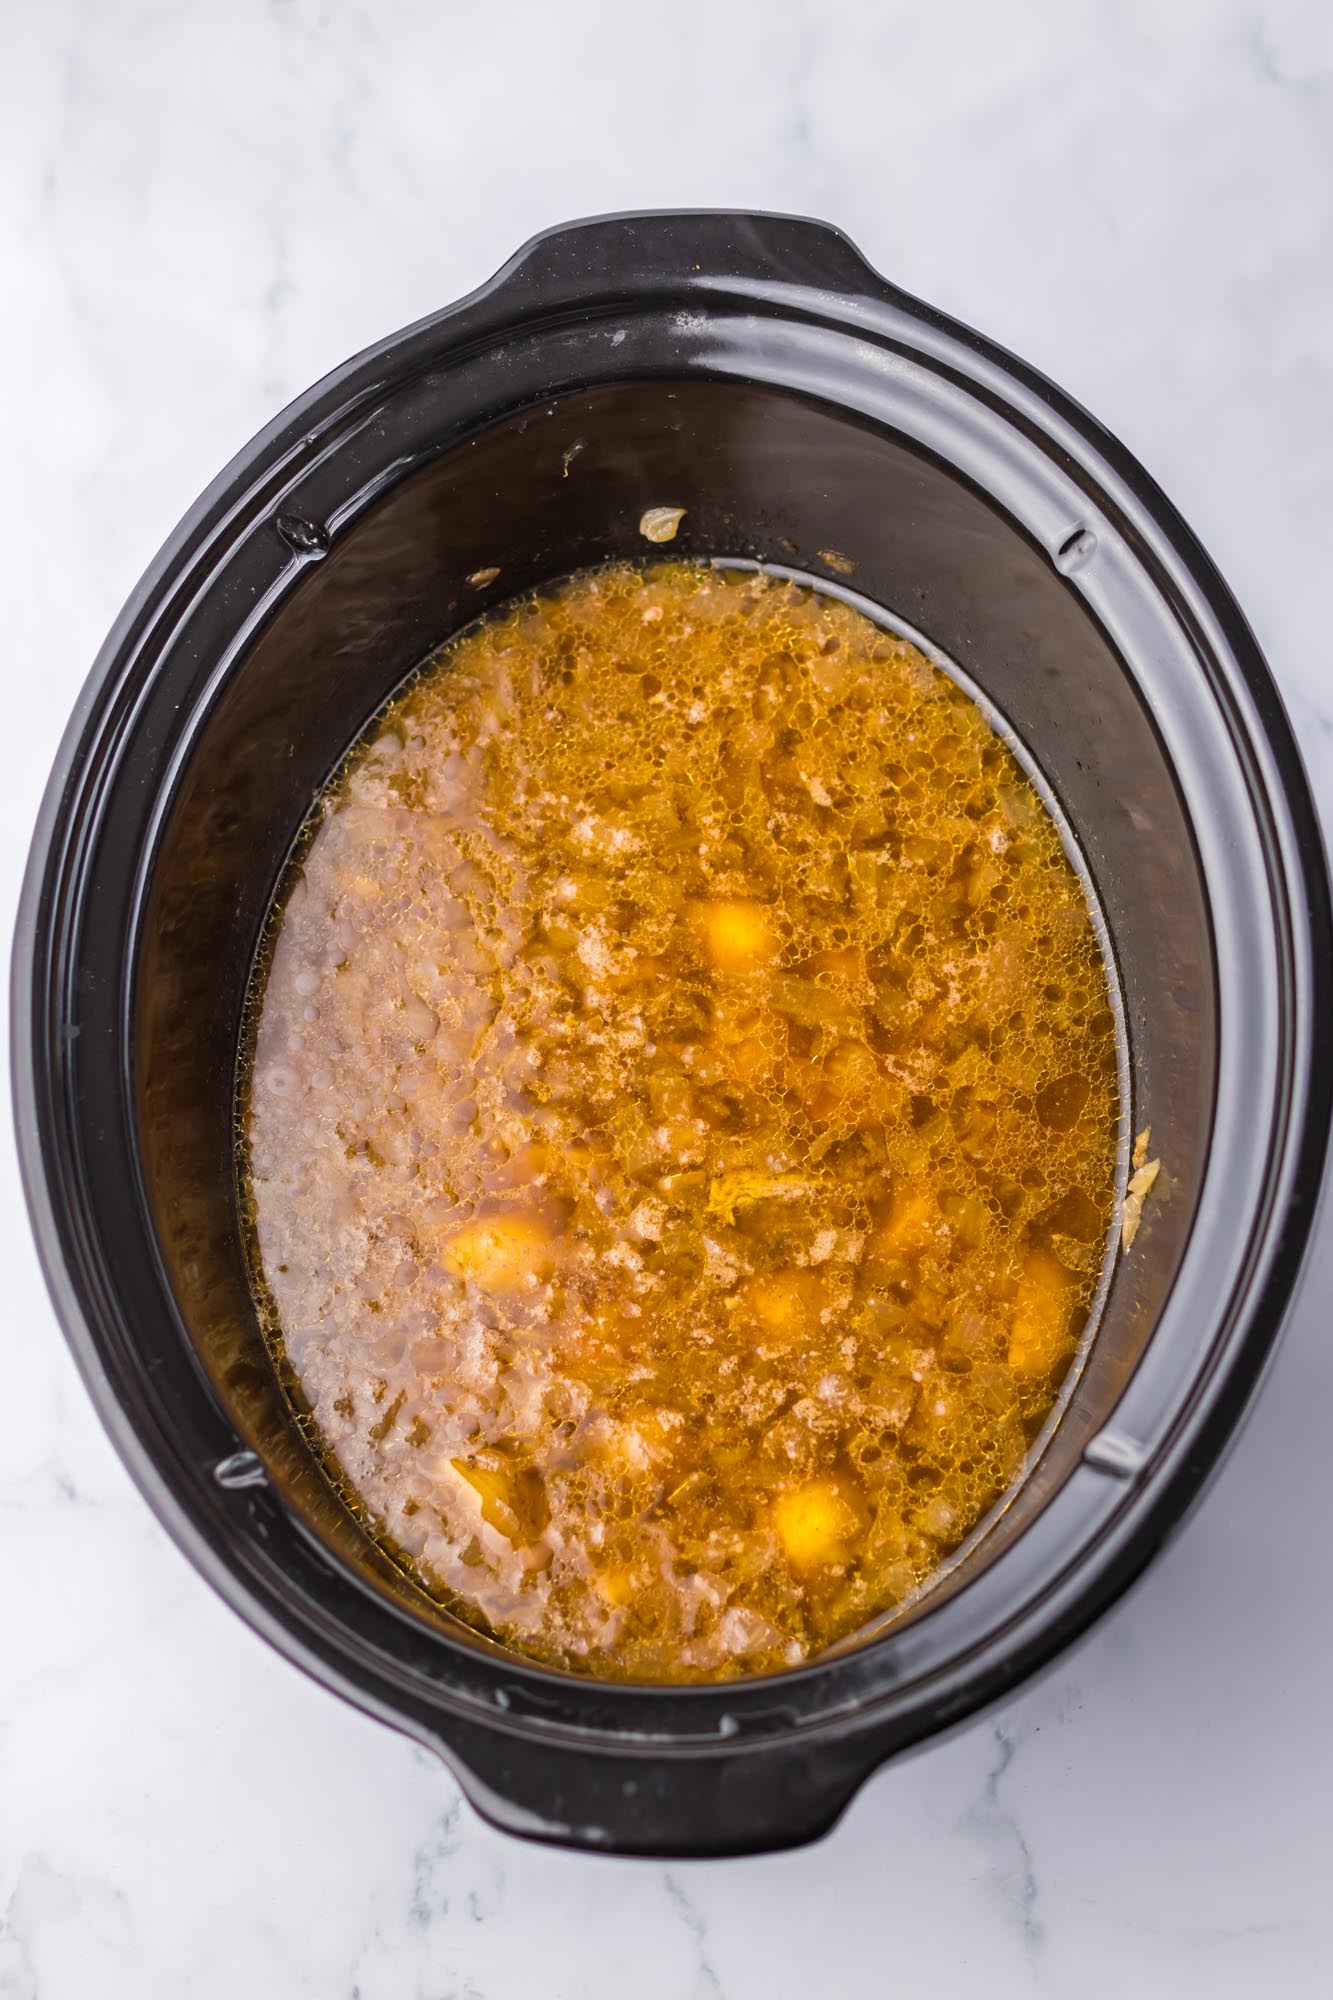 Beef broth in a slow cooker